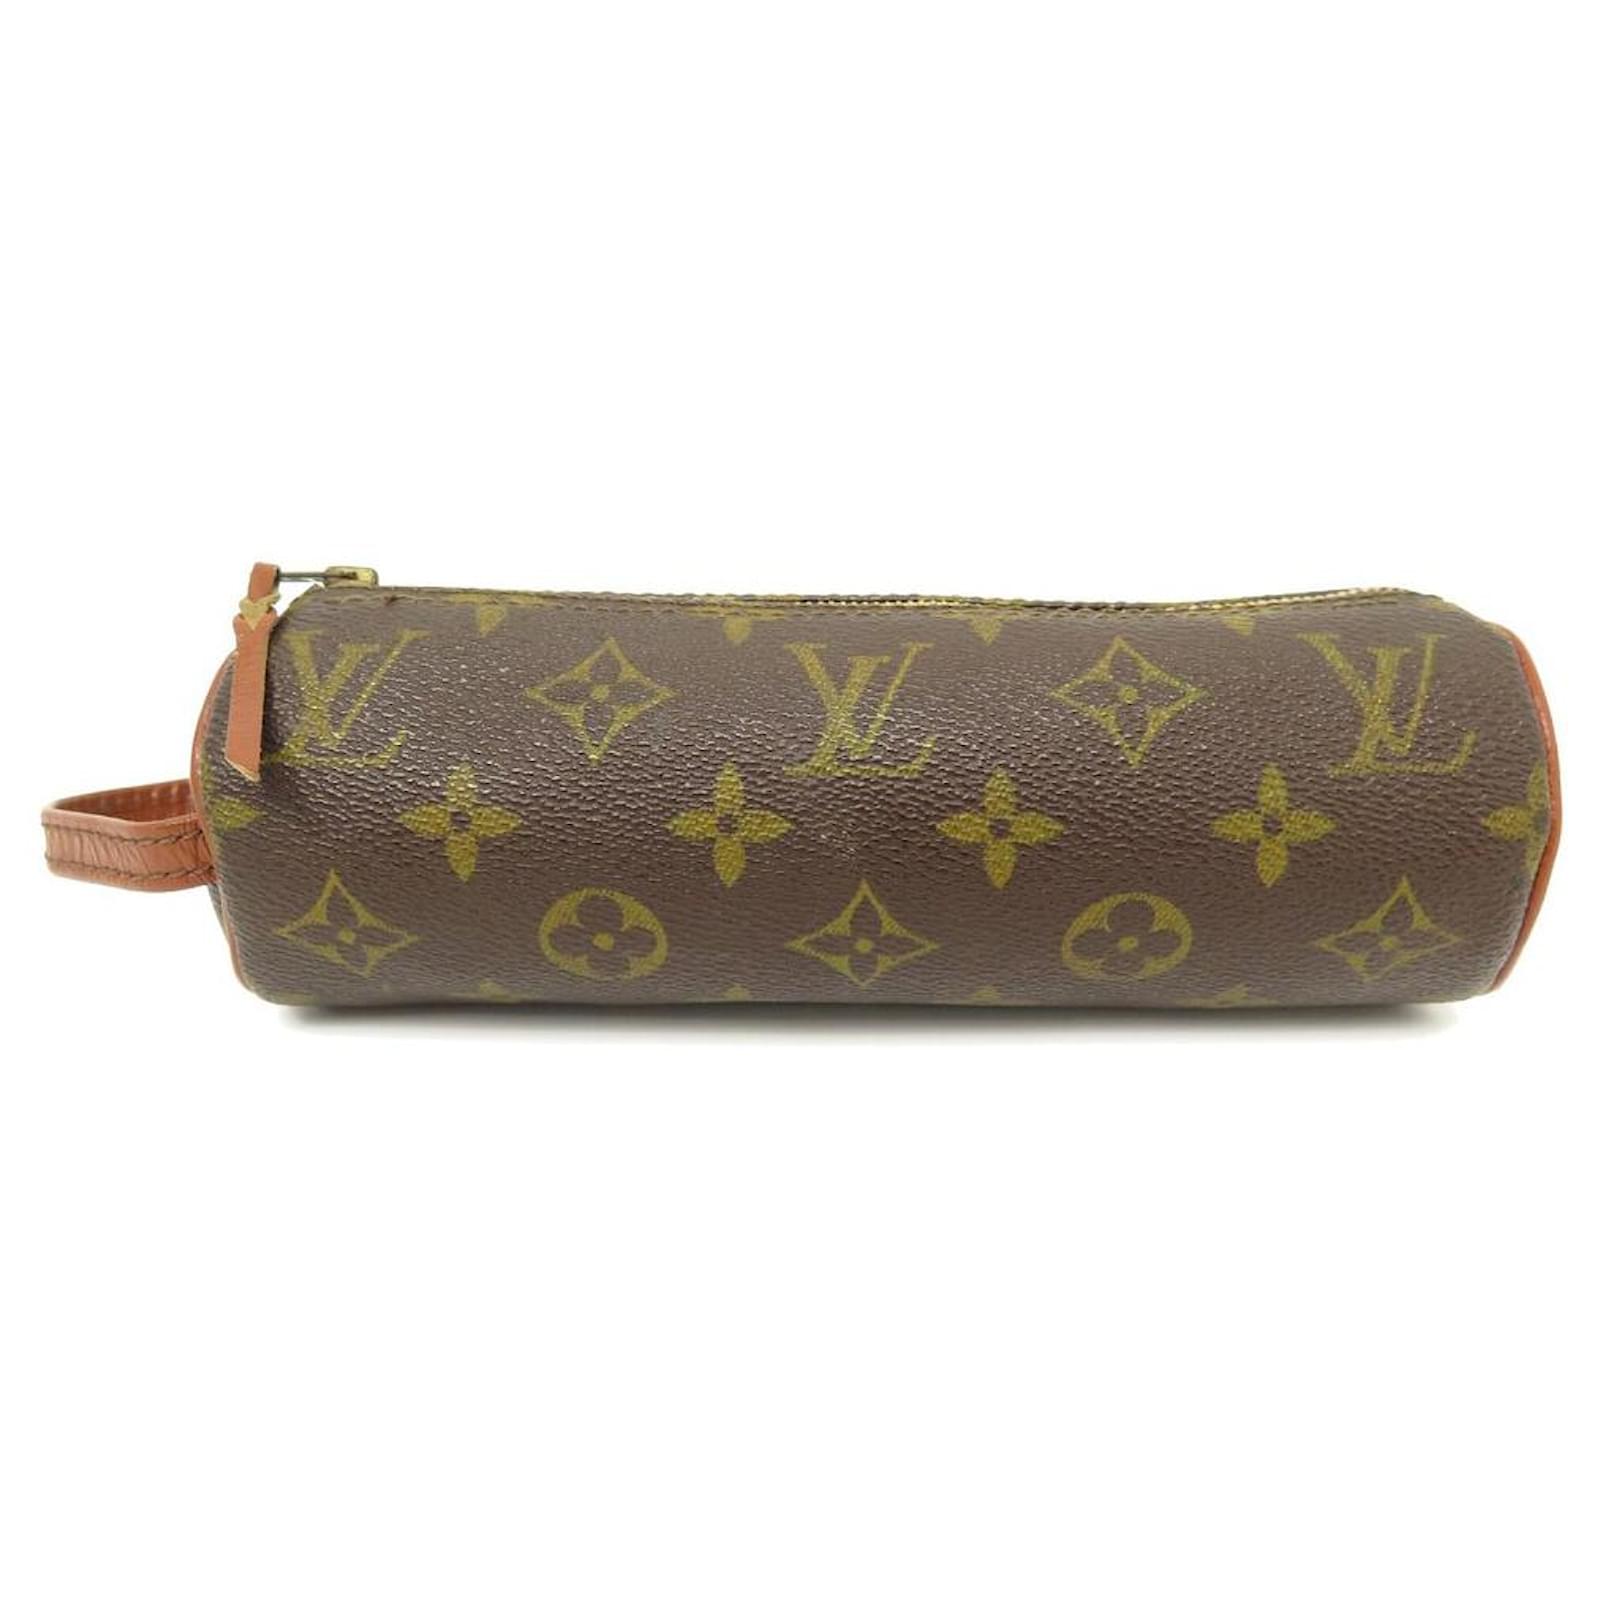 A Louis Vuitton Monogram Canvas and Leather Golf Bag by Louis